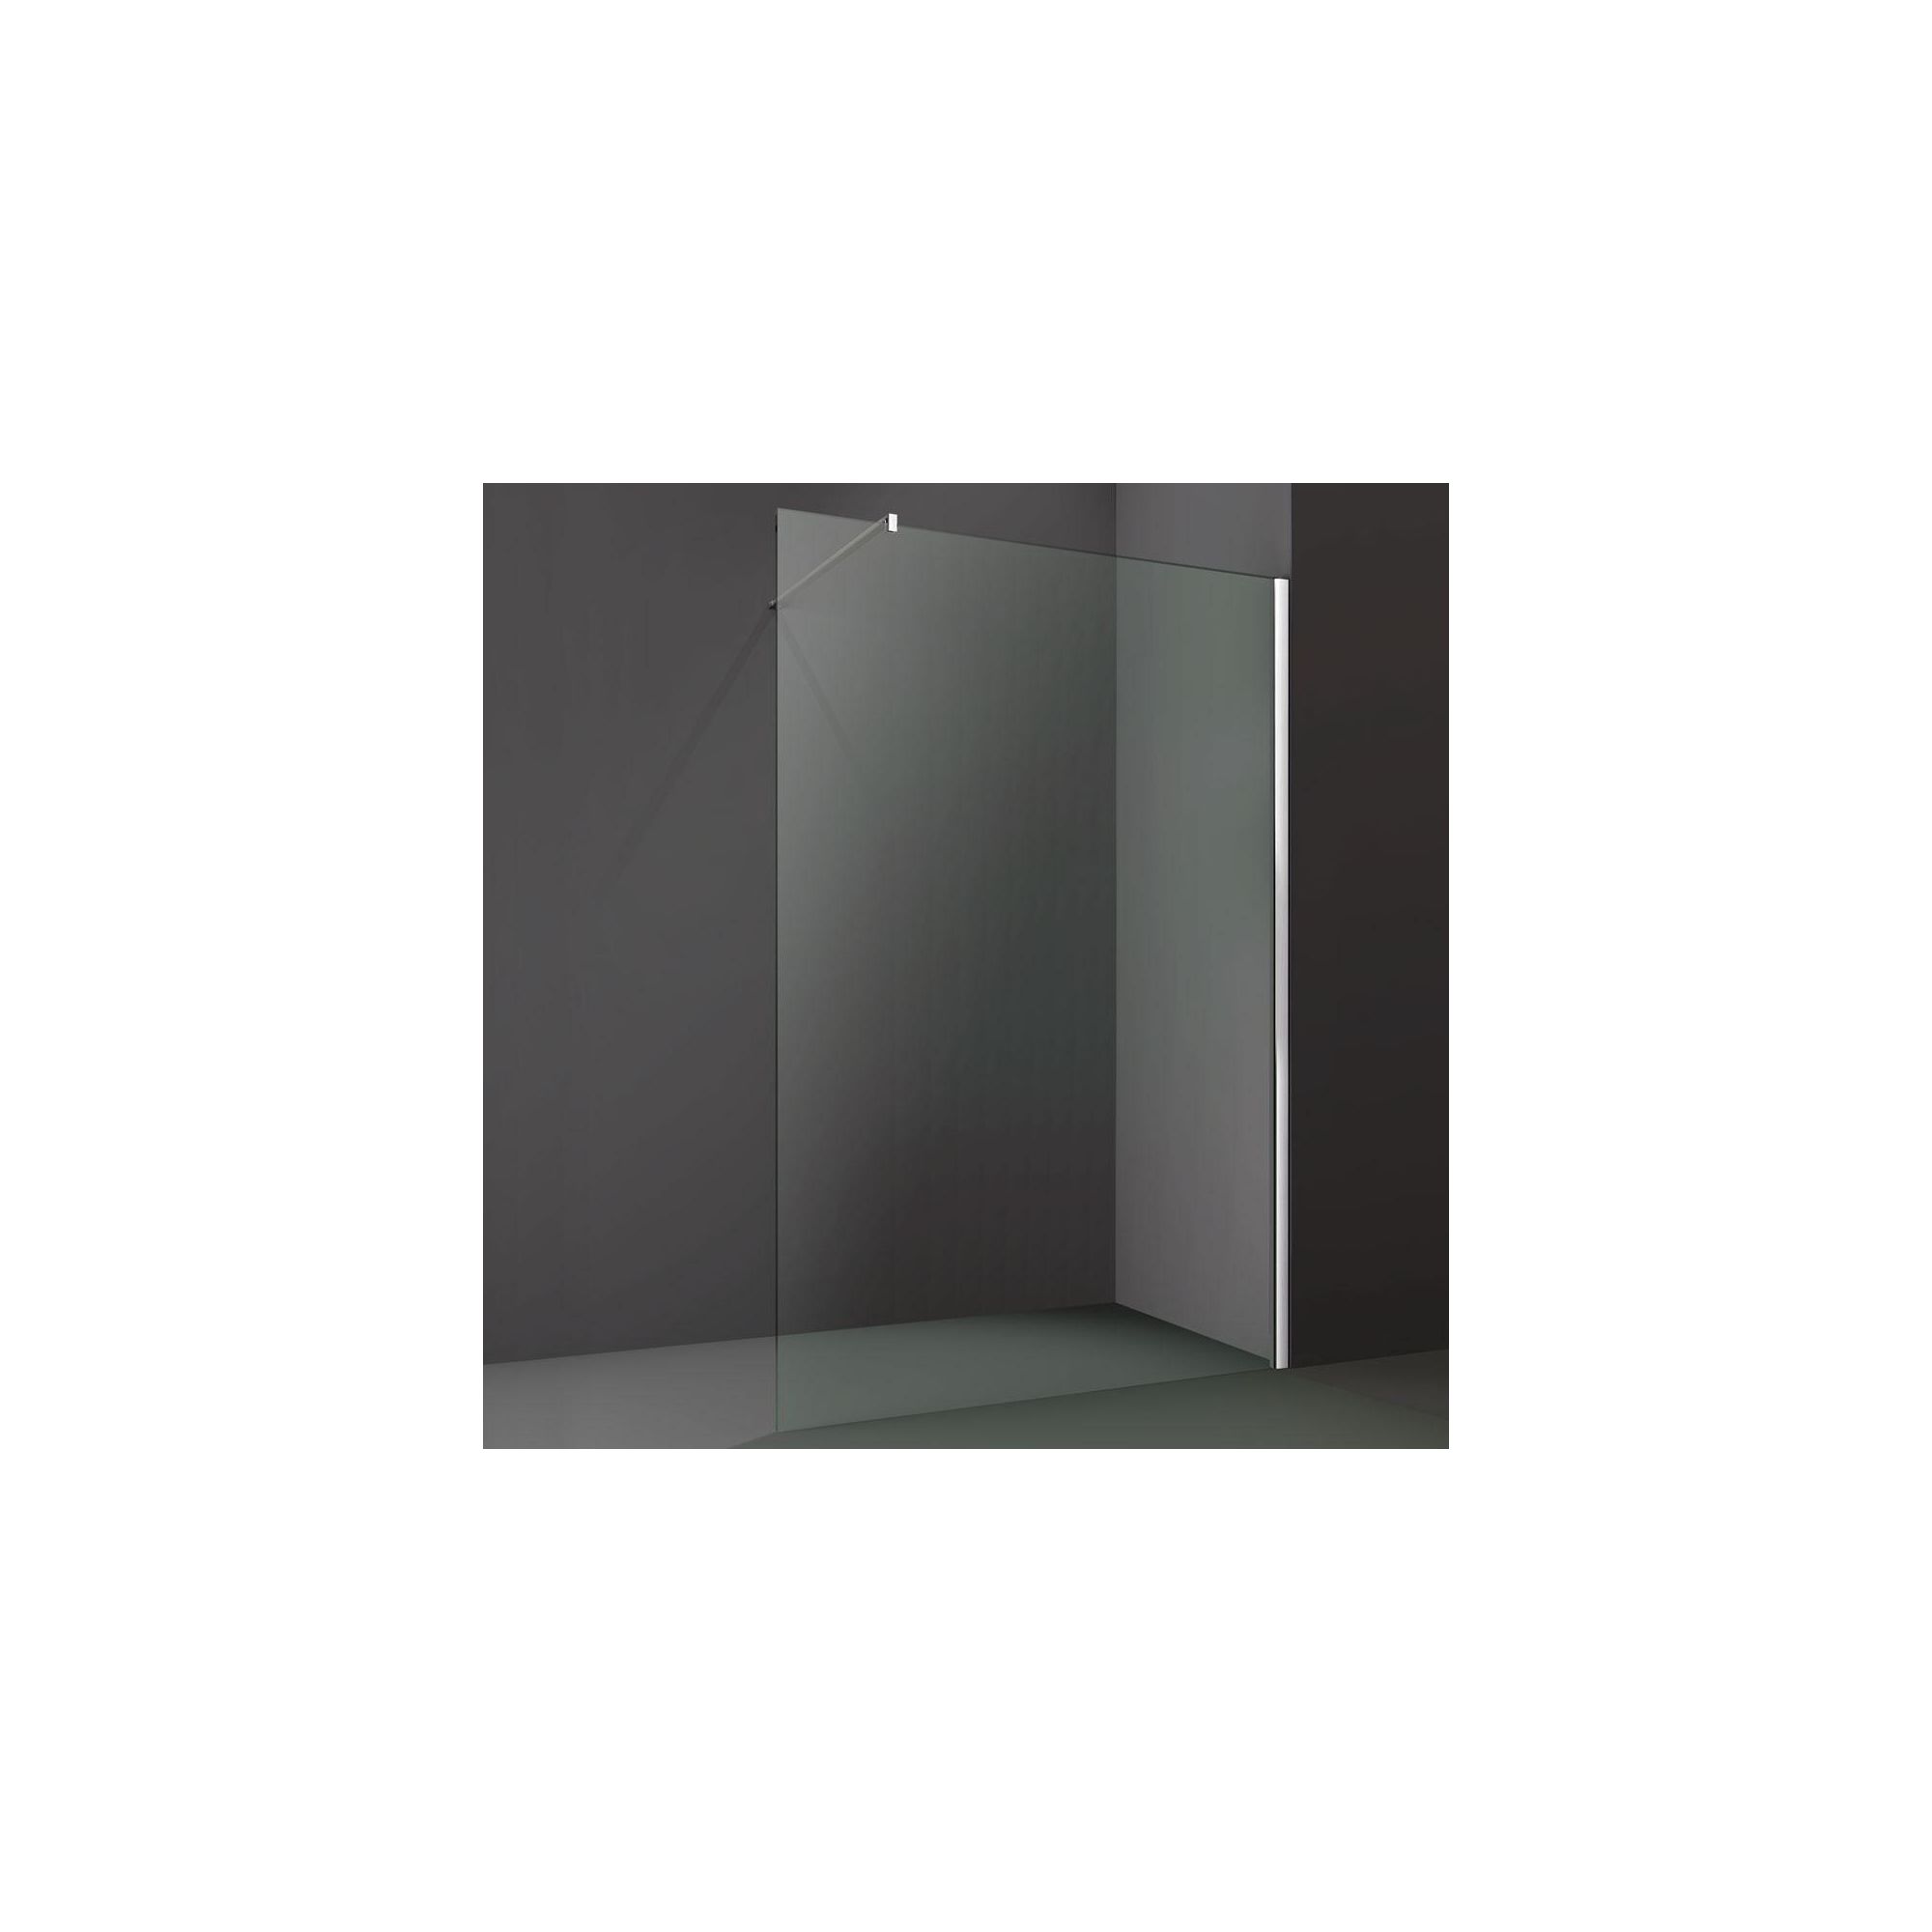 Merlyn Series 8 Wet Room Glass Shower Panel, 800mm Wide, 8mm Glass at Tescos Direct